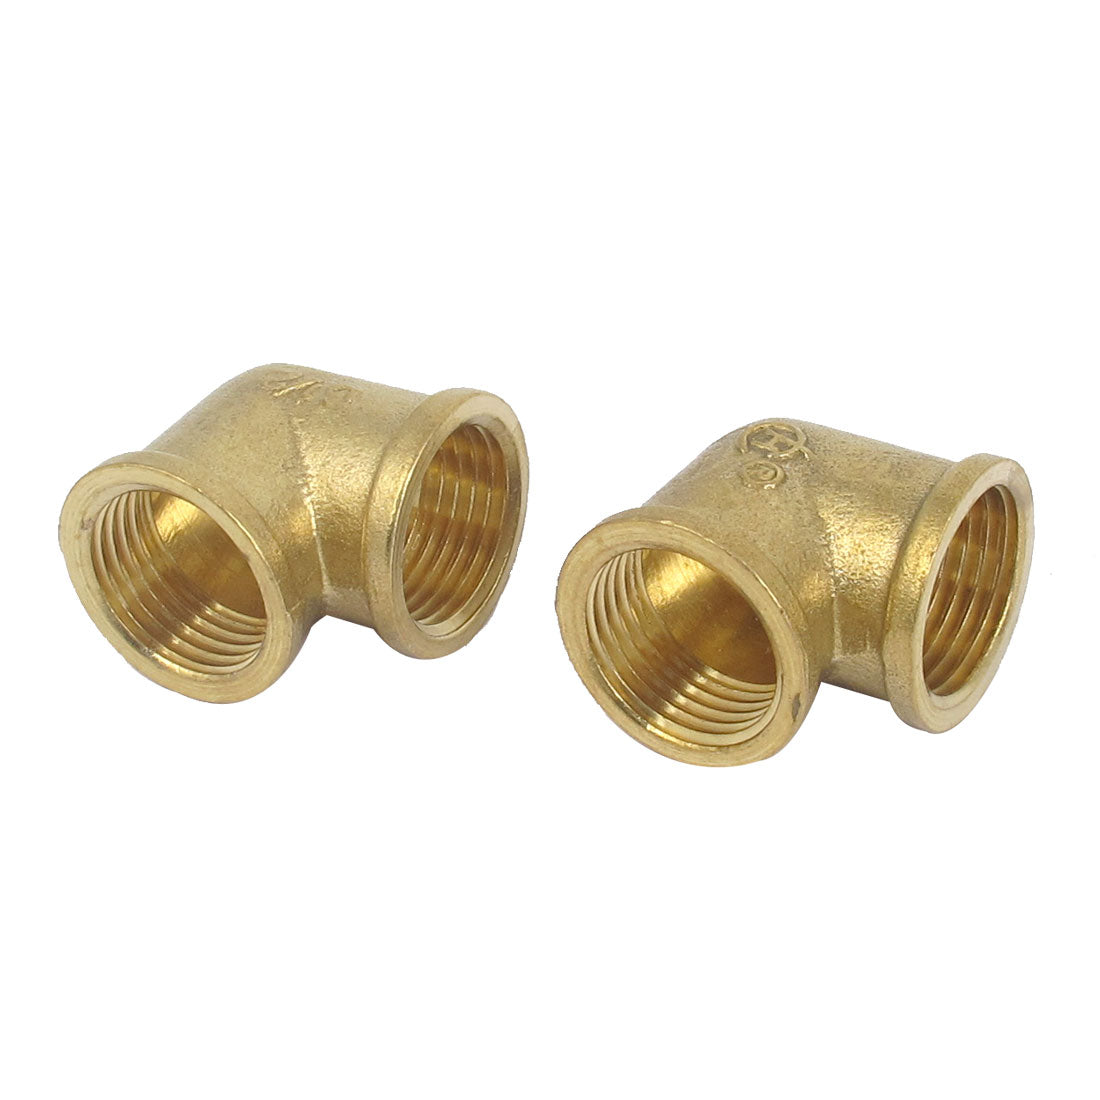 uxcell Uxcell 1/2BSP Female to Female Metal 90 Degree Elbow Hose Pipe Tube Fitting Connector 2pcs